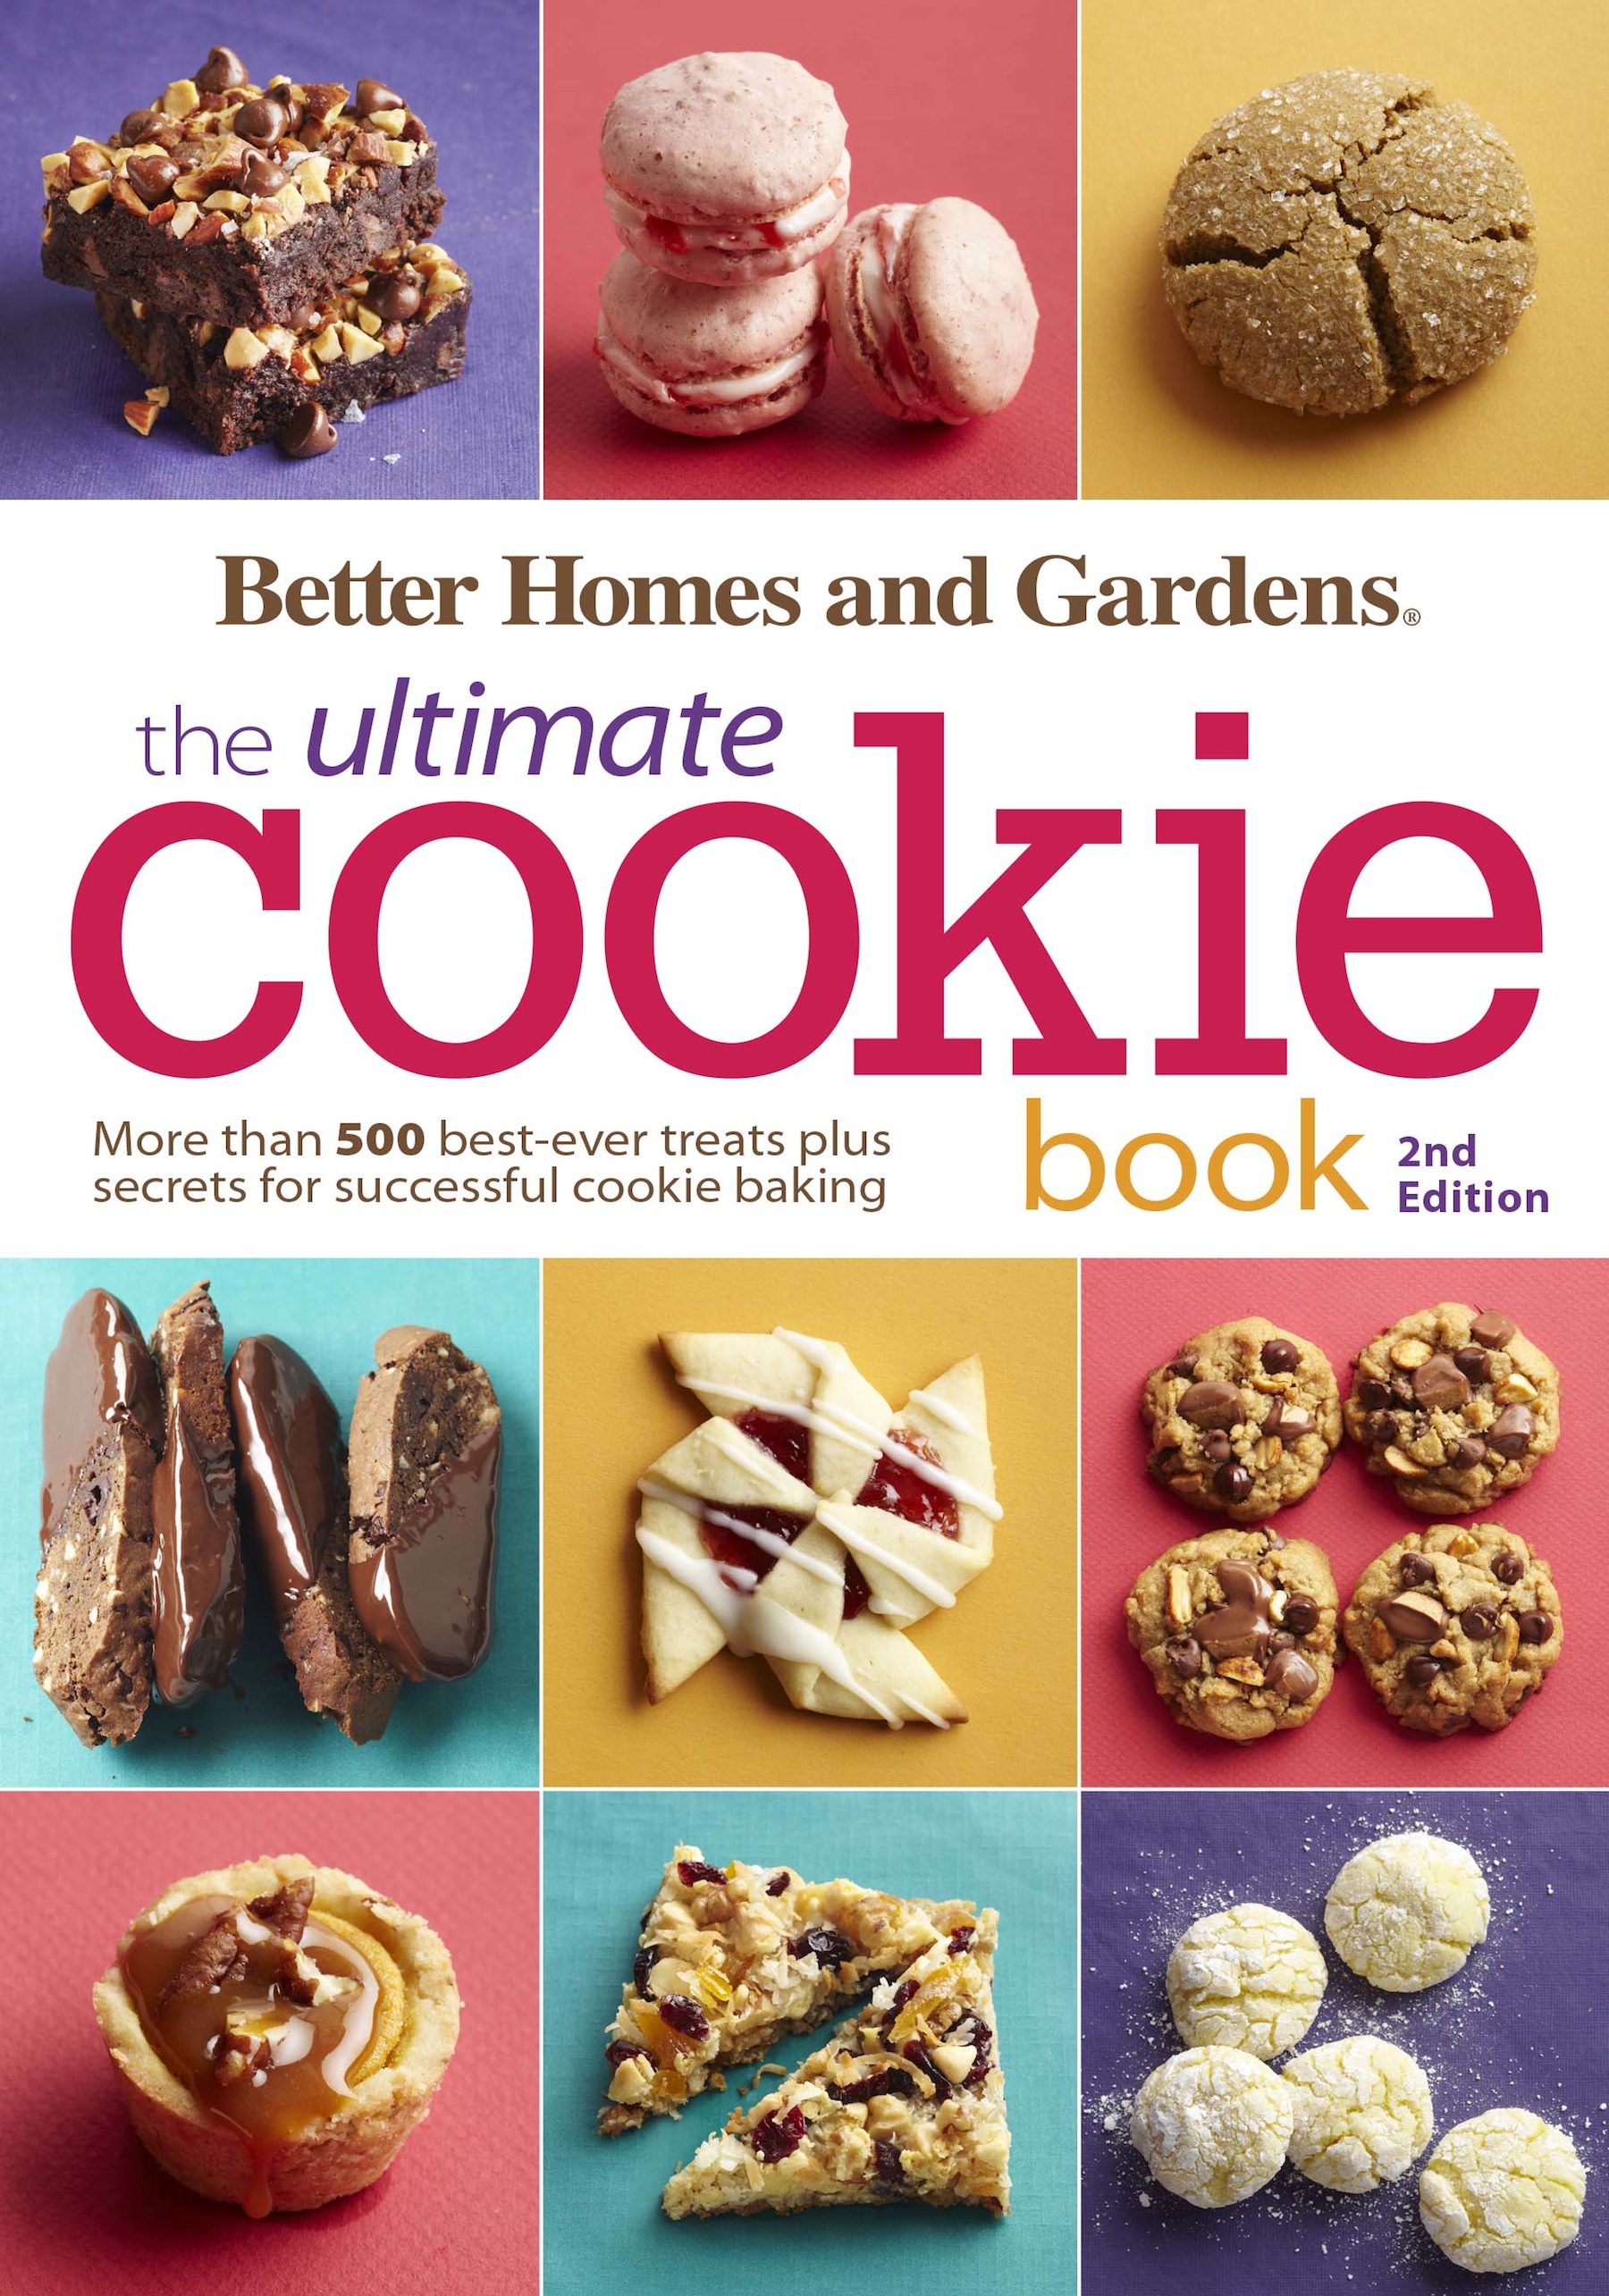 Umschlagbild für Better Homes and Gardens The Ultimate Cookie Book, Second Edition [electronic resource] : More than 500 Best-Ever Treats Plus Secrets for Successful Cookie Baking